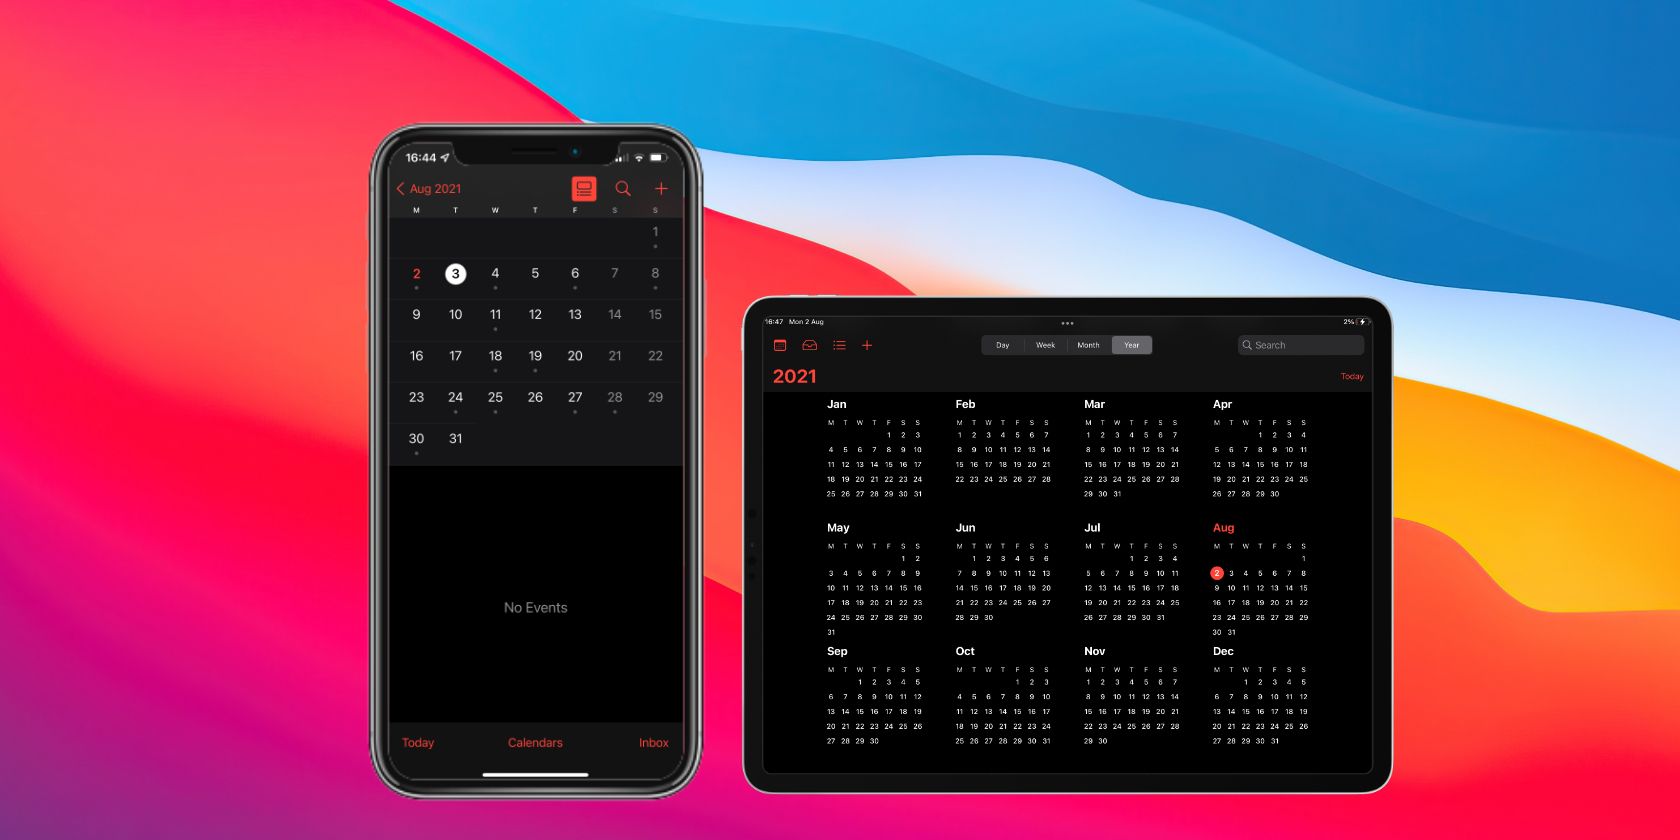 How to Remove Calendar Events from an iPhone or iPad